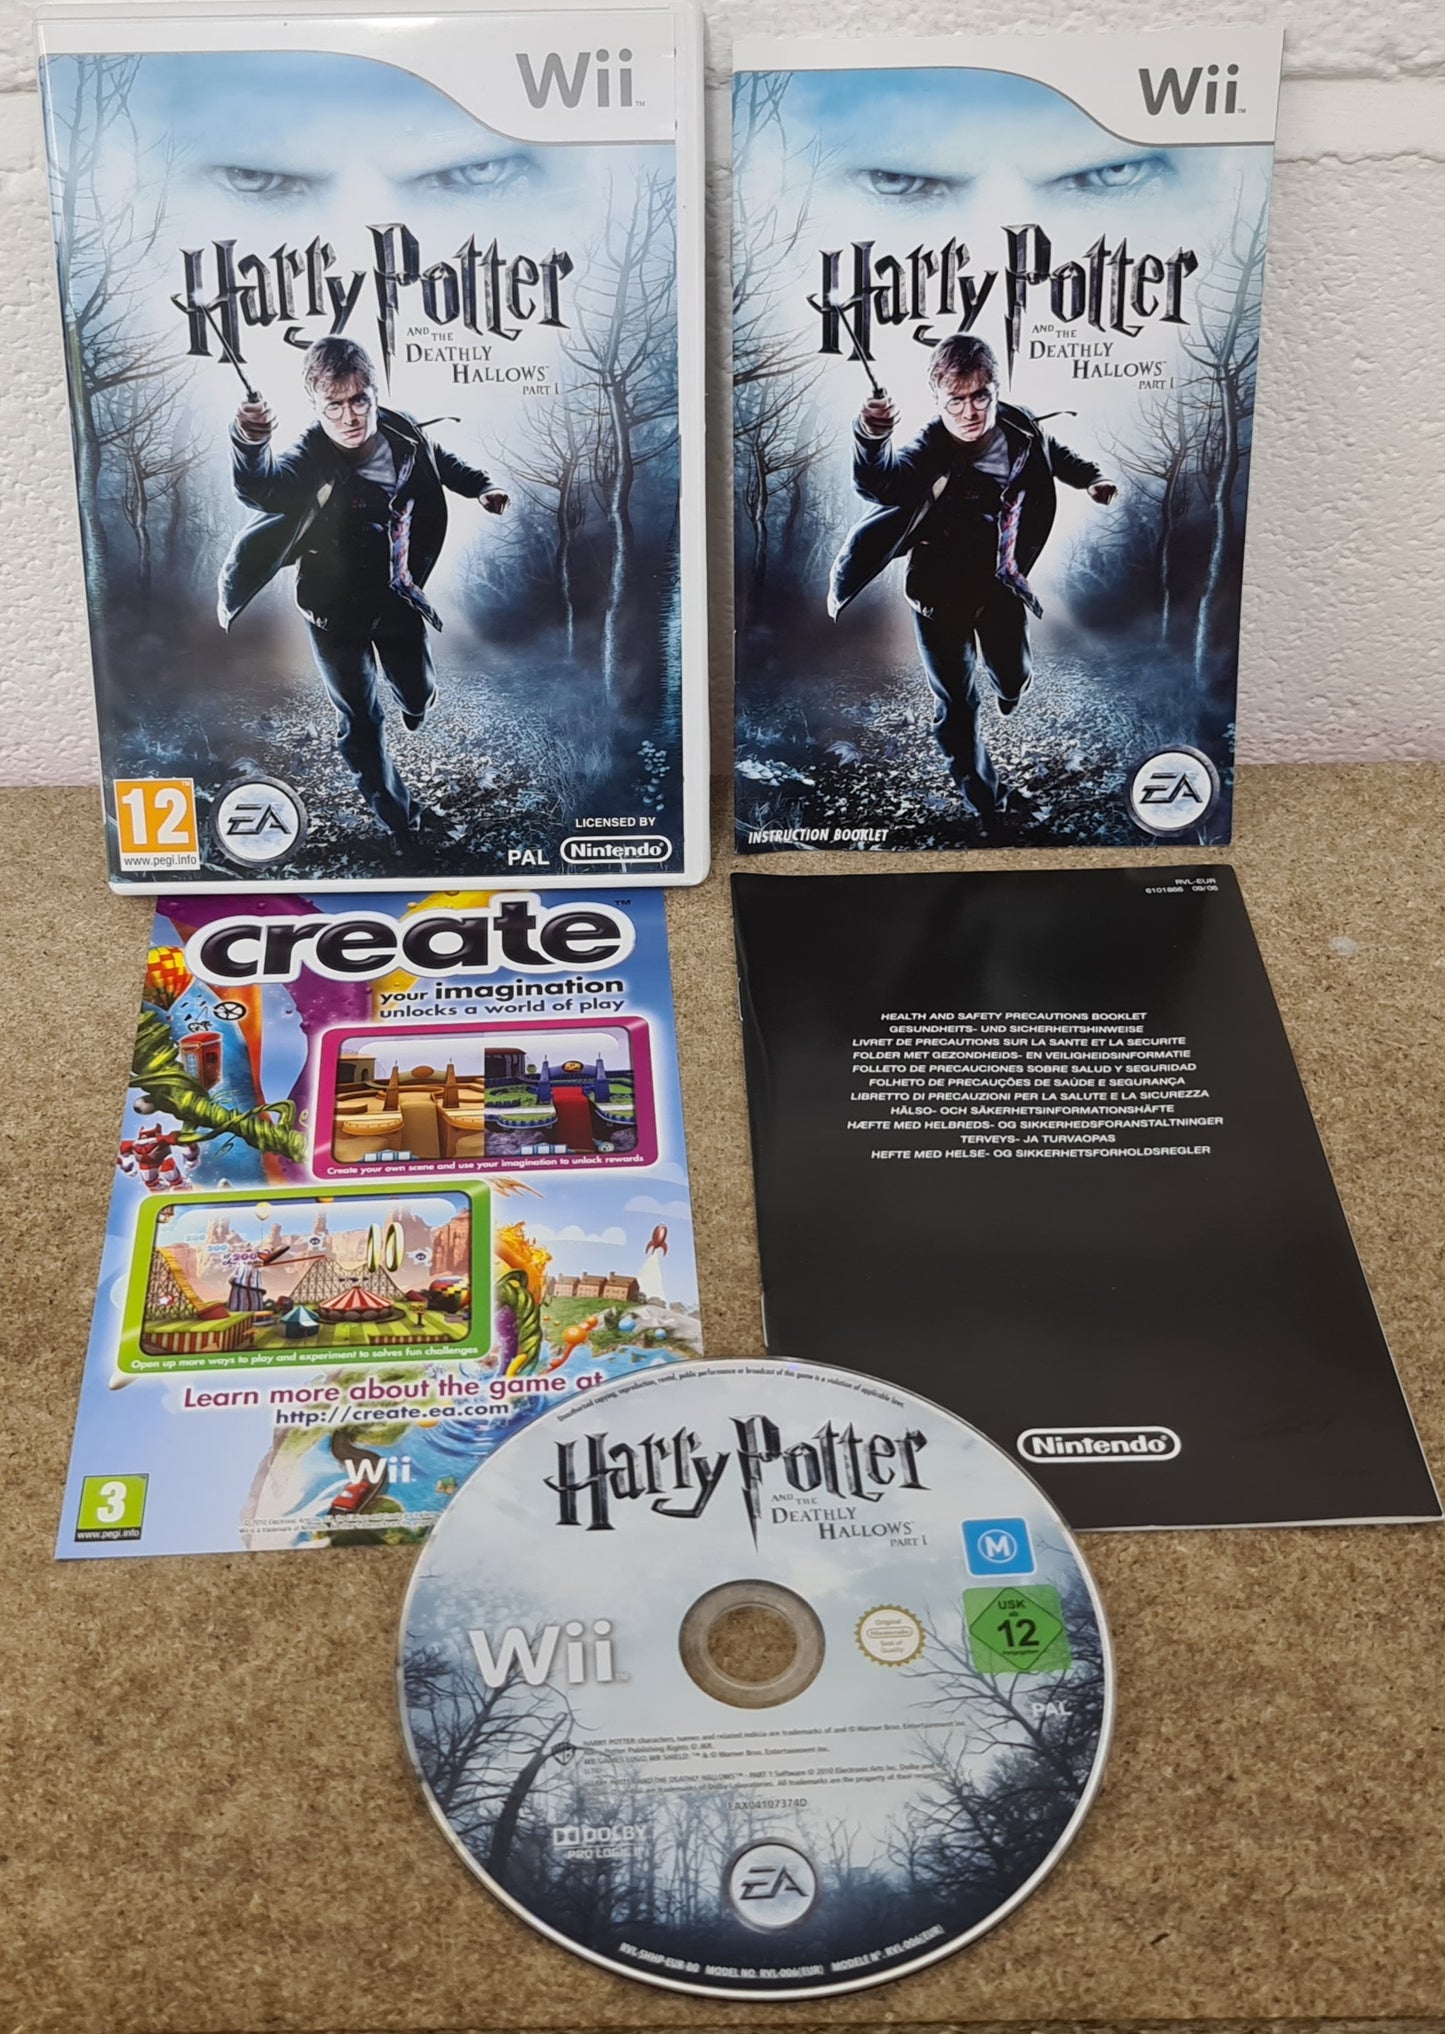 Harry Potter and the Deathly Hallows Part 1 Nintendo Wii Game